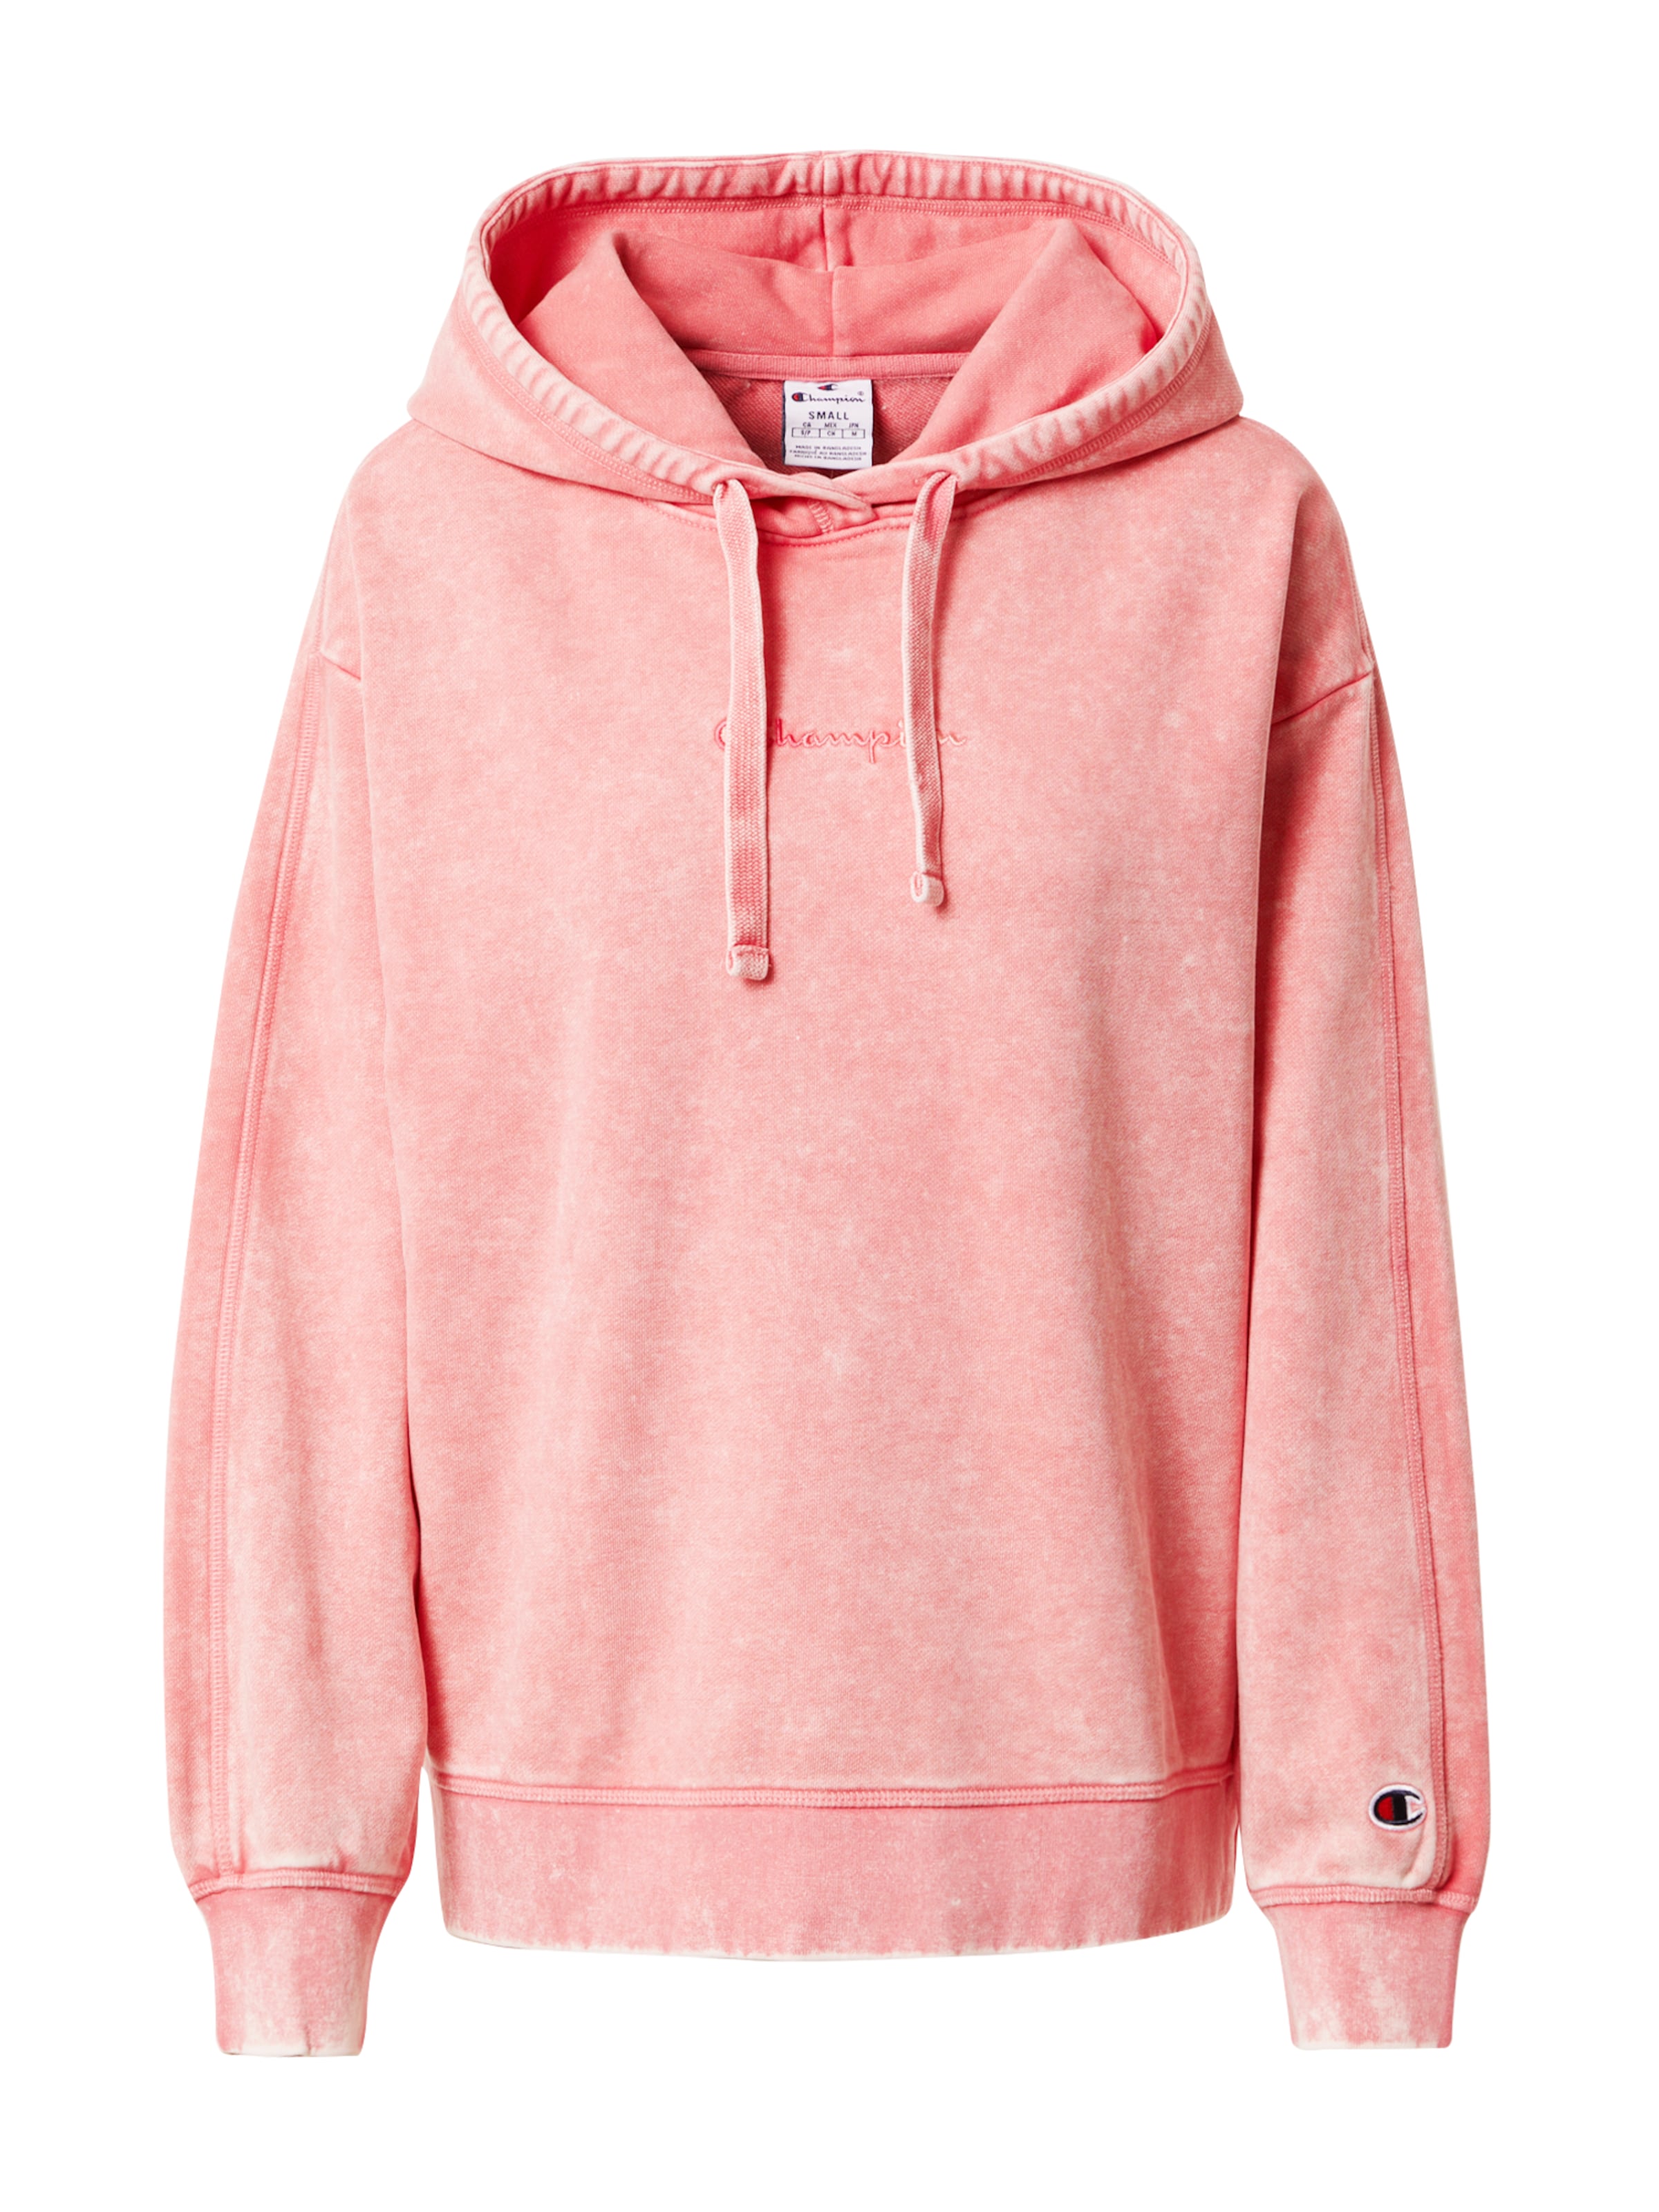 Frauen Sweat Champion Authentic Athletic Apparel Sweatshirt 'Rochester' in Koralle - RS16025